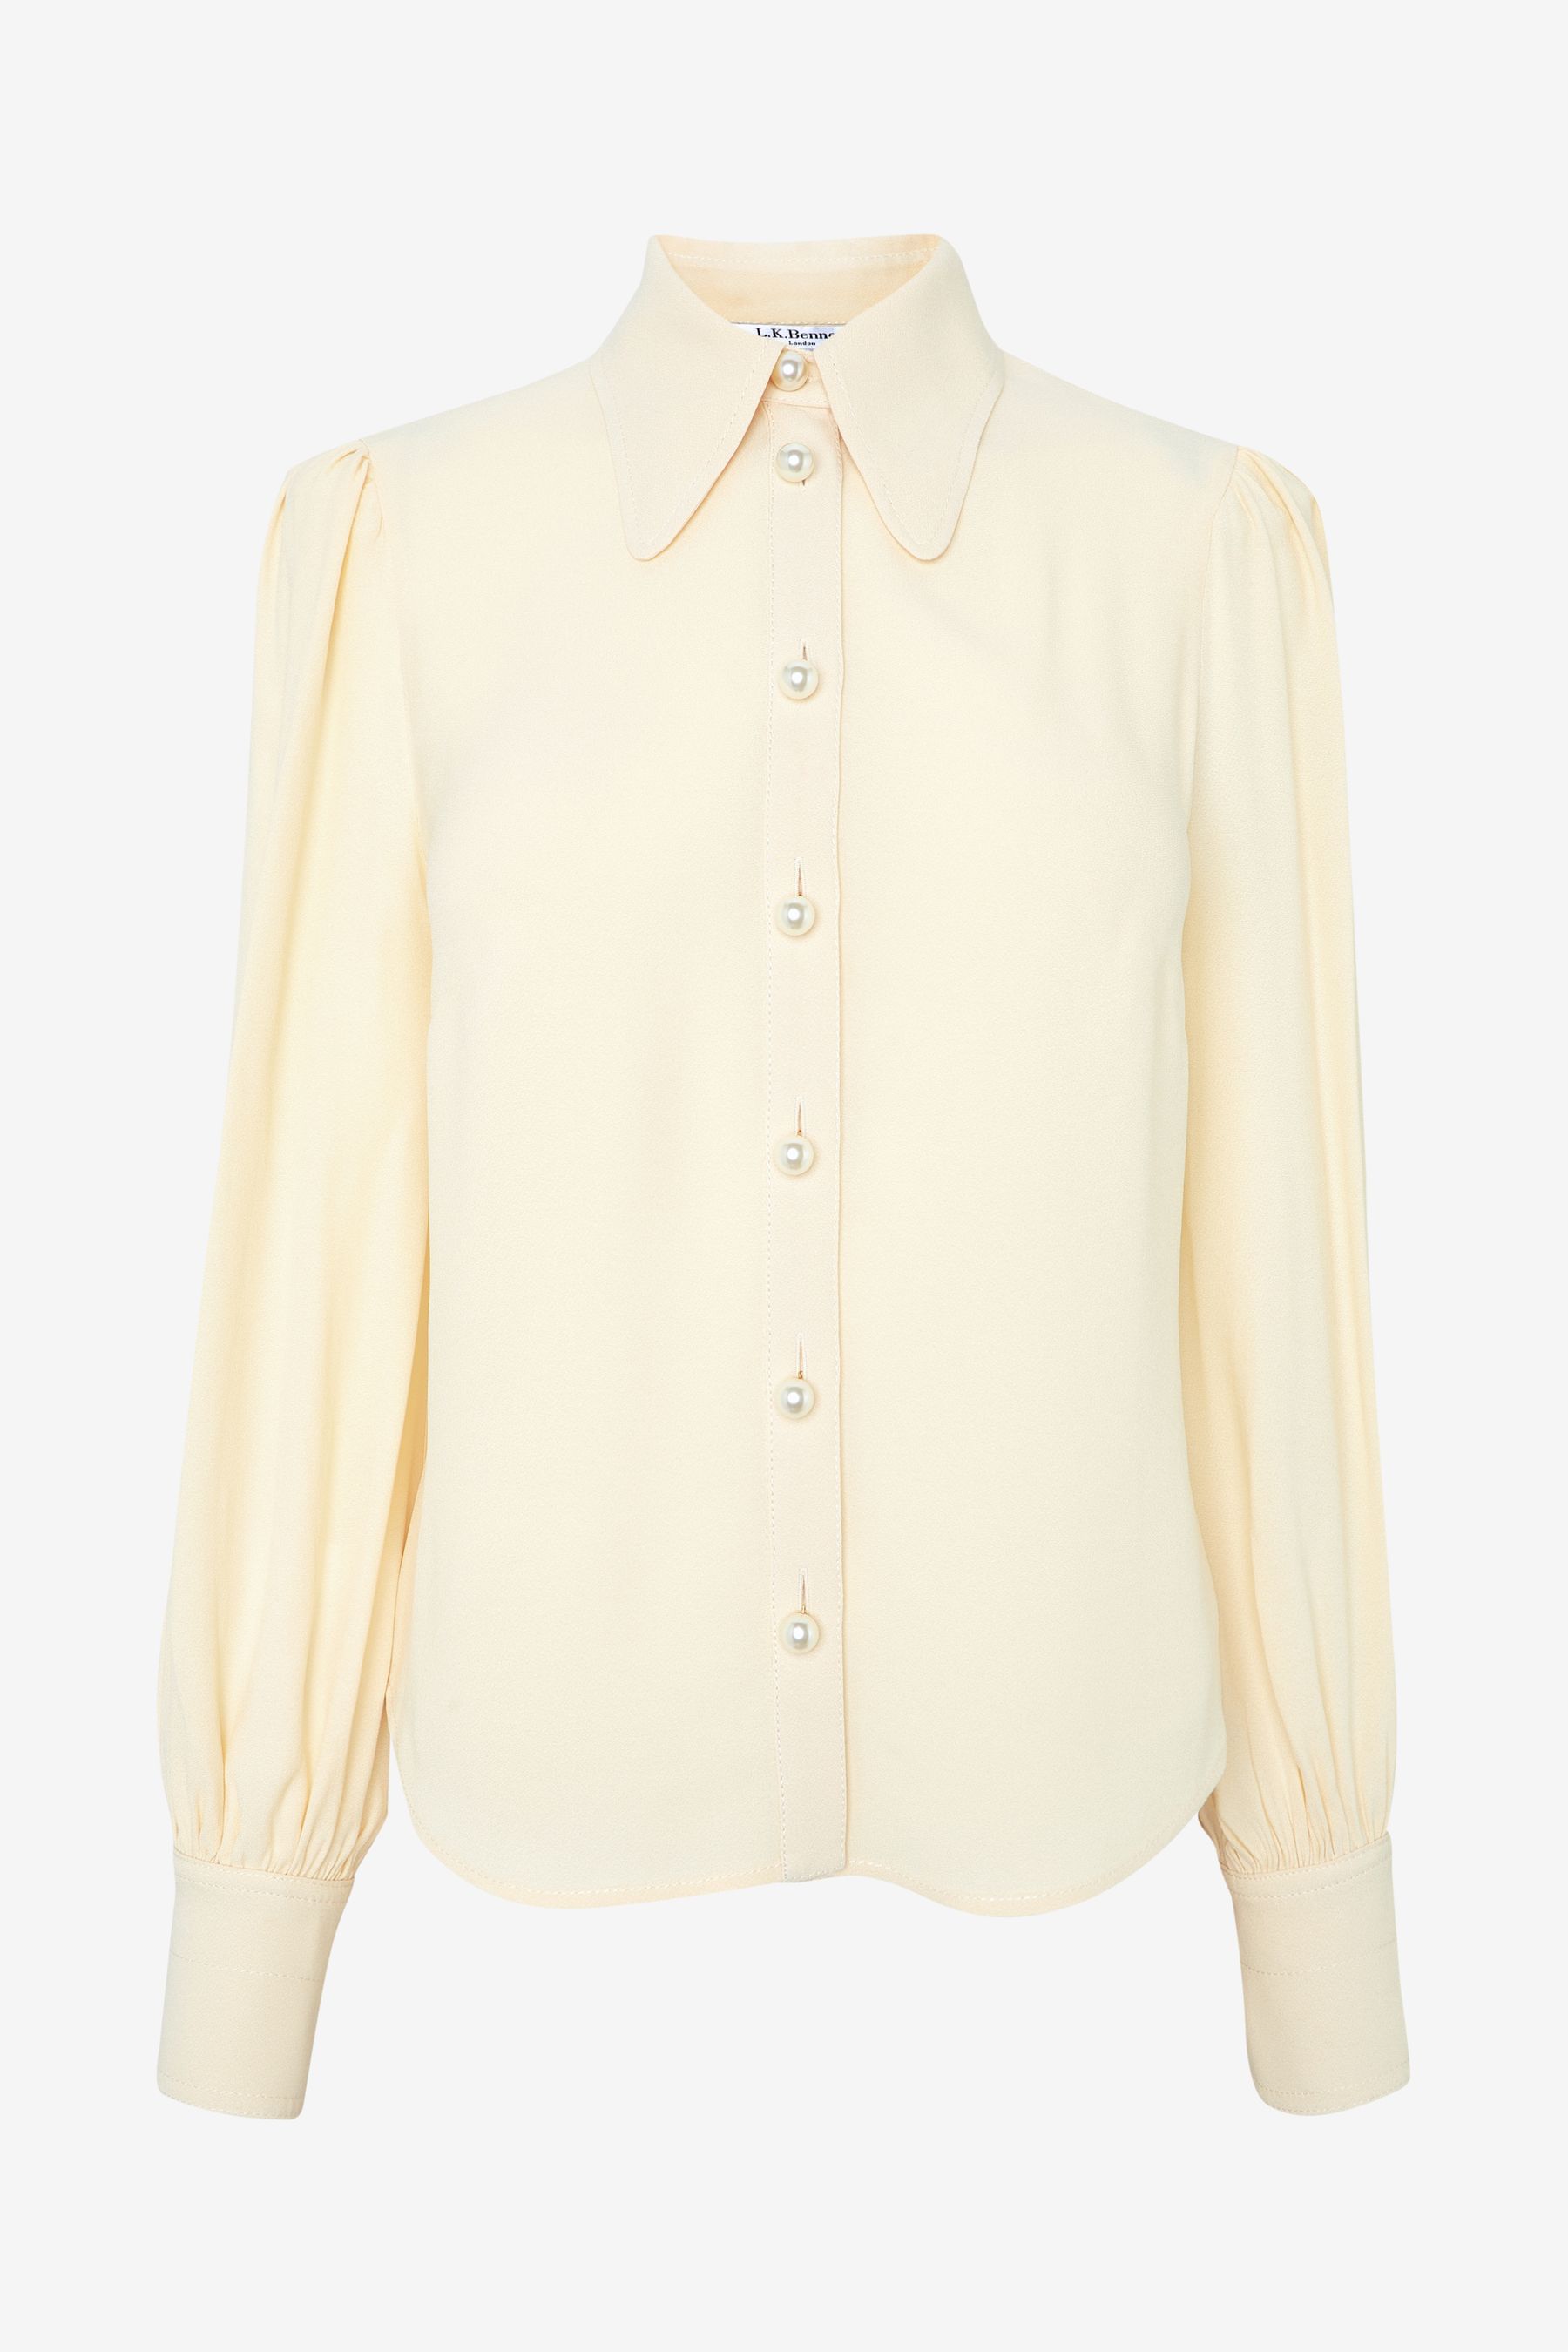 Buy LK Bennett Cream Sonya Crepe Blouse With Pearl Buttons from the ...